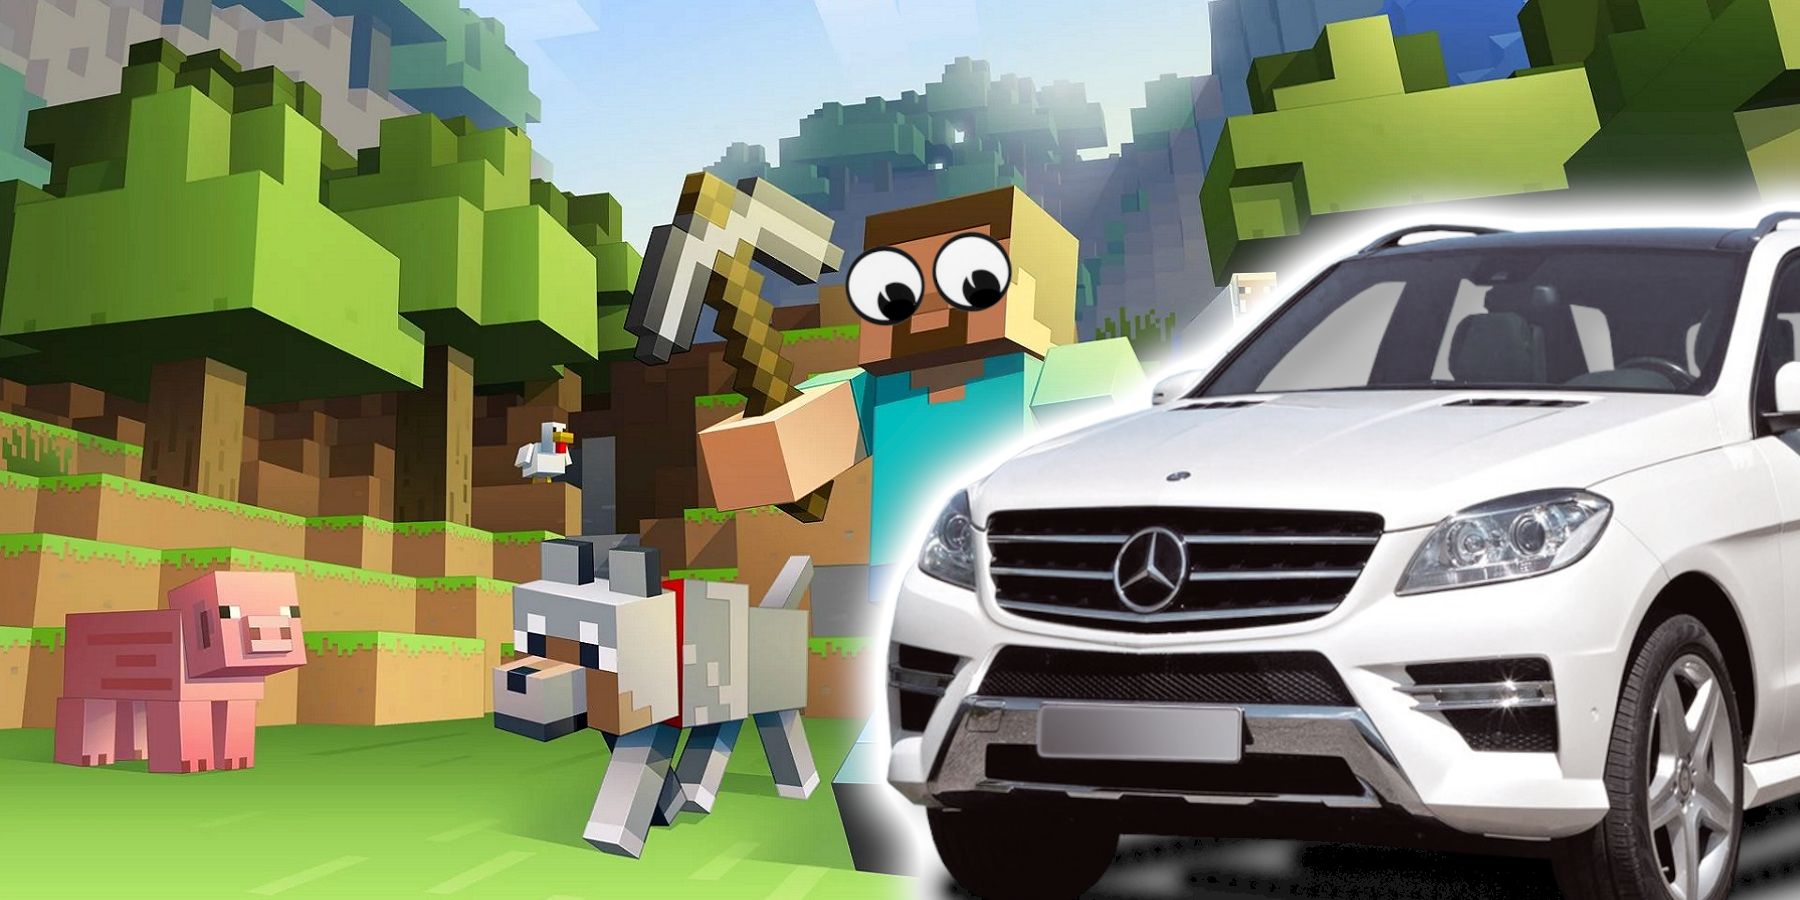 An image from Minecraft showing Steve looking at a white car.